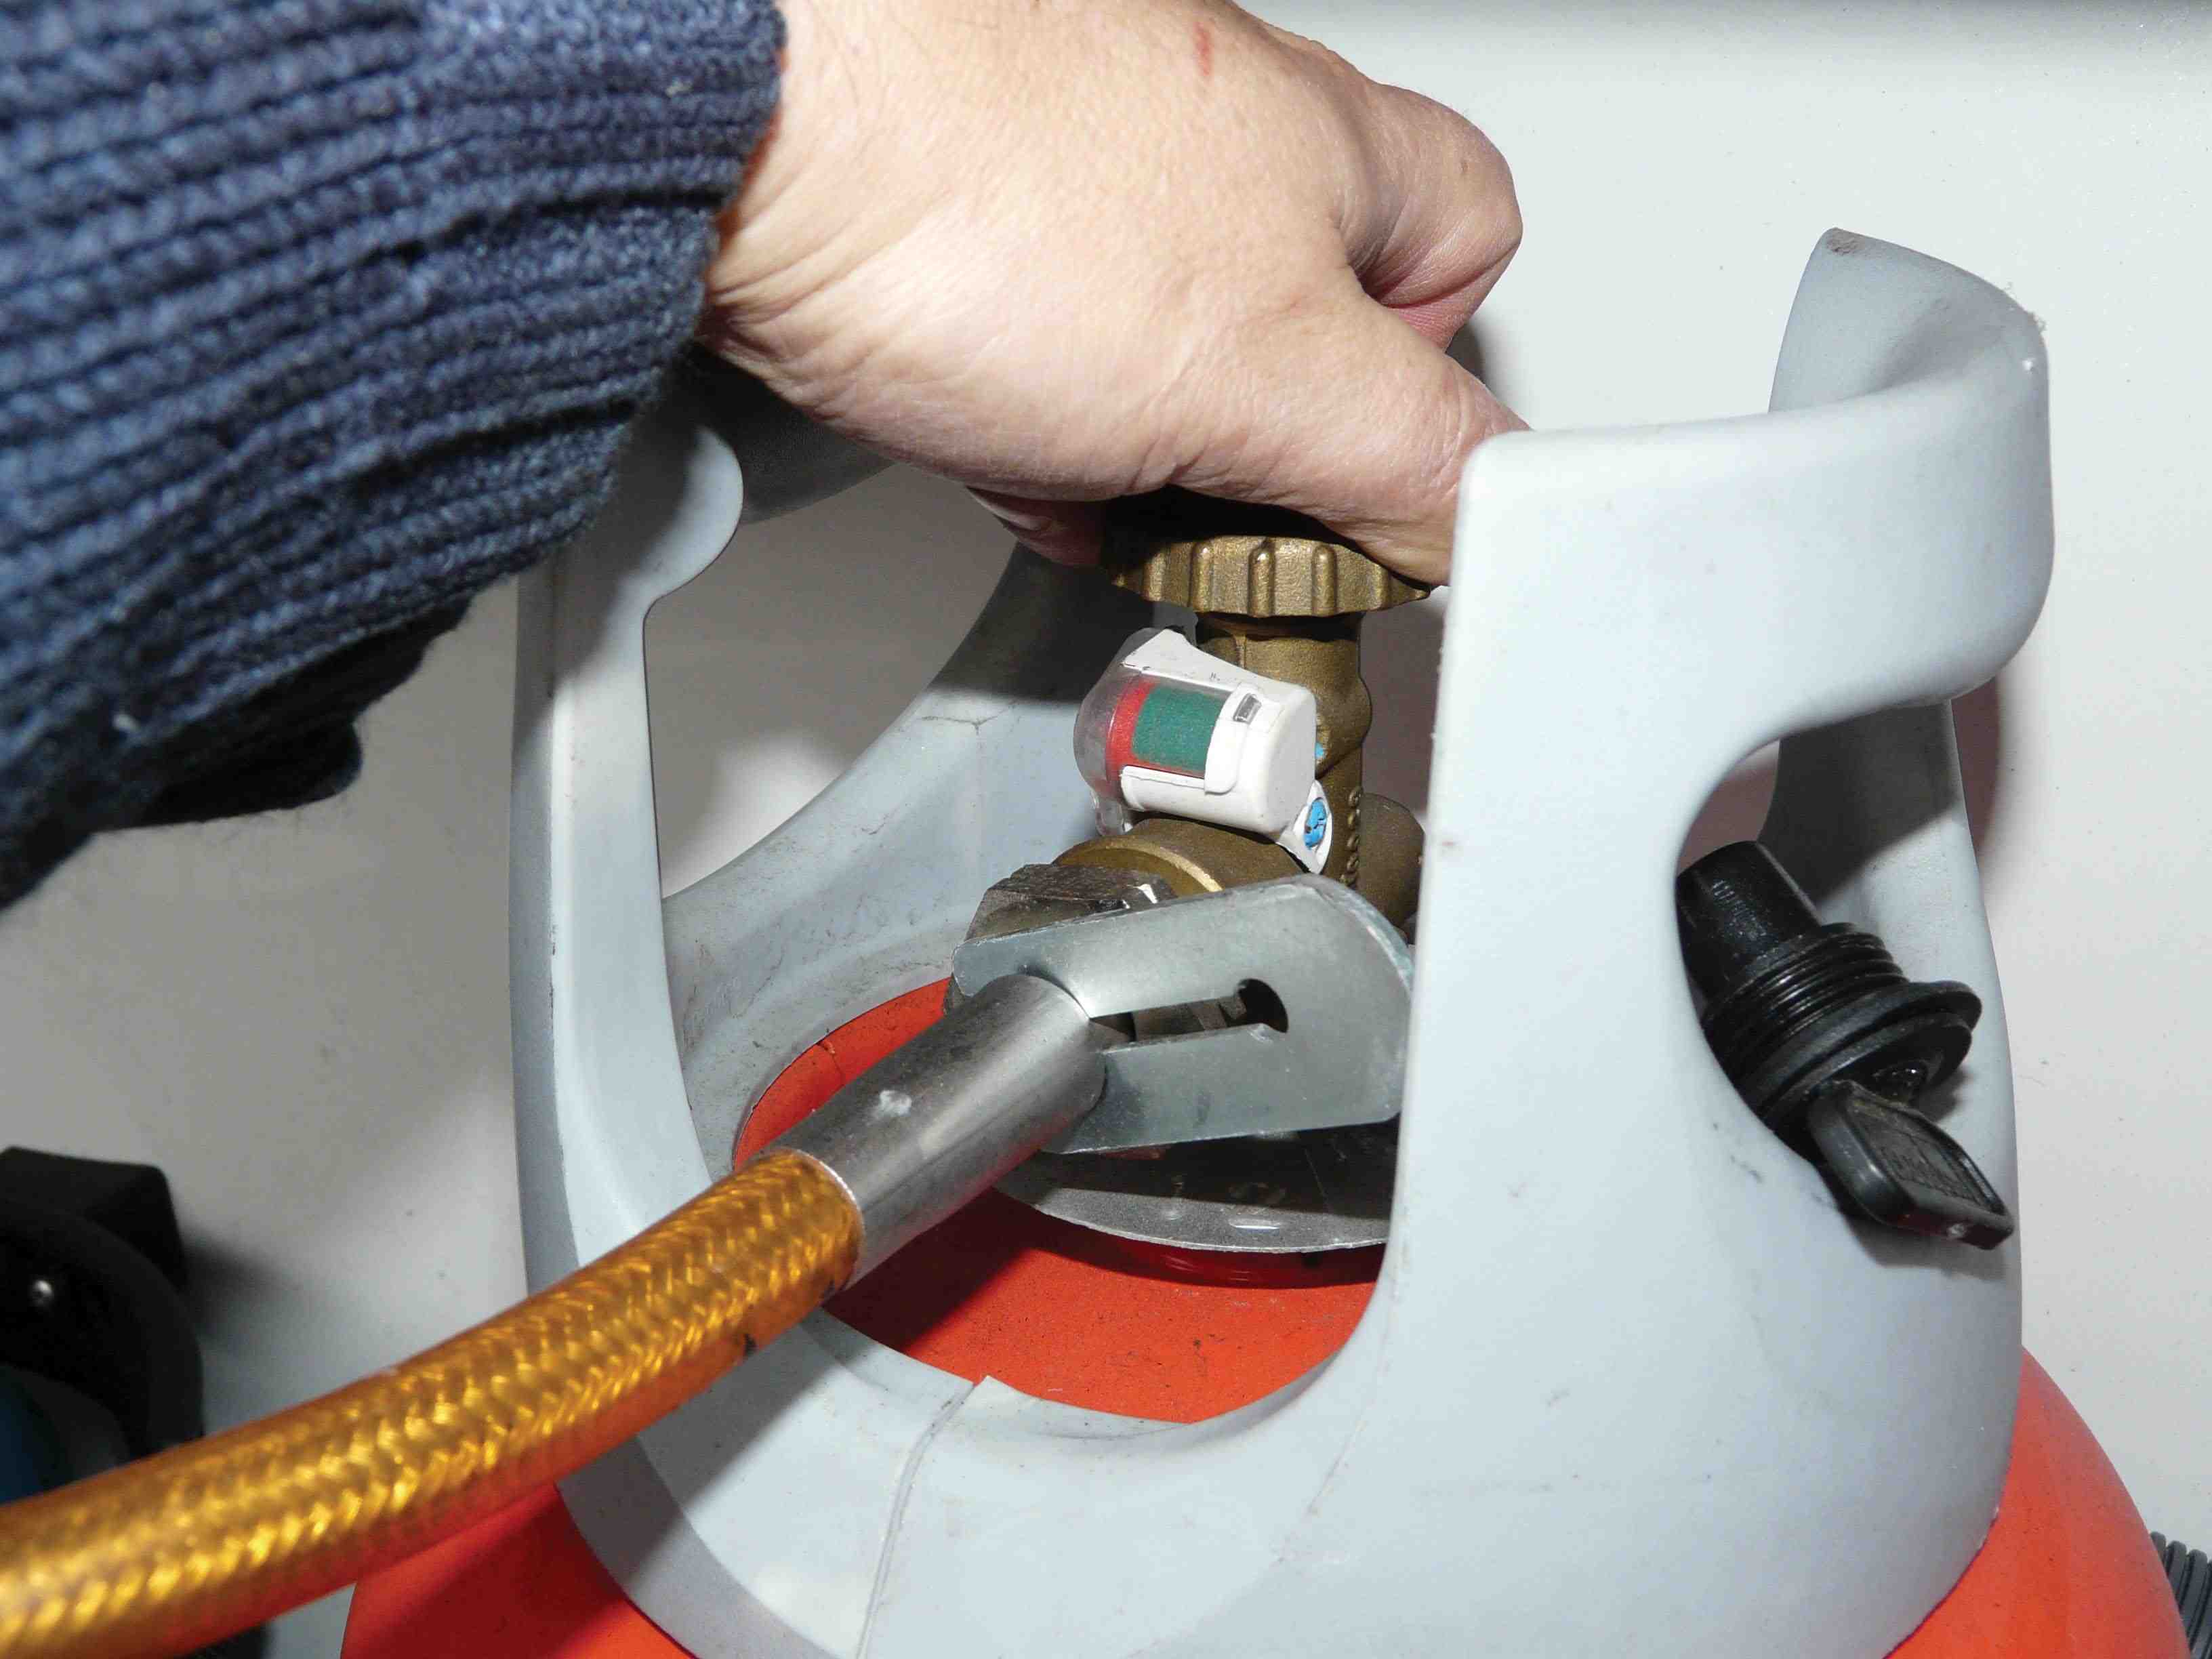 Make sure the valves on the top of gas cylinders are closed or the regulators disconnected and caps fitted